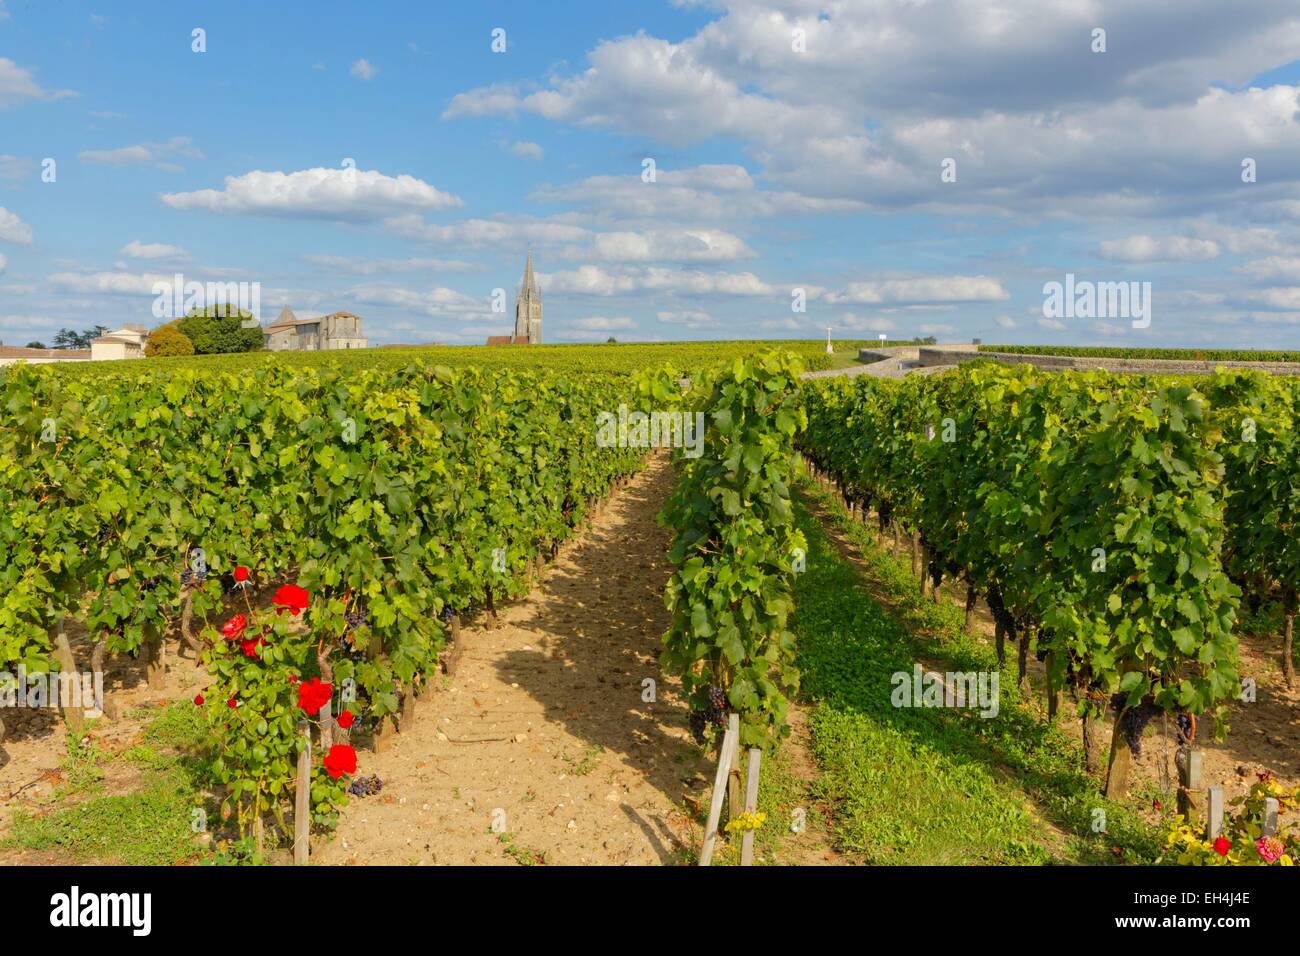 France, Gironde, Saint Emilion, listed as World Heritage by UNESCO, Bordeaux vineyard, vineyard of Chateau Canon, Premier Grand Cru Classe B (Classification of Saint Emilion wine as First Great Growths), AOC Saint Emilion Great Classified Growth Stock Photo